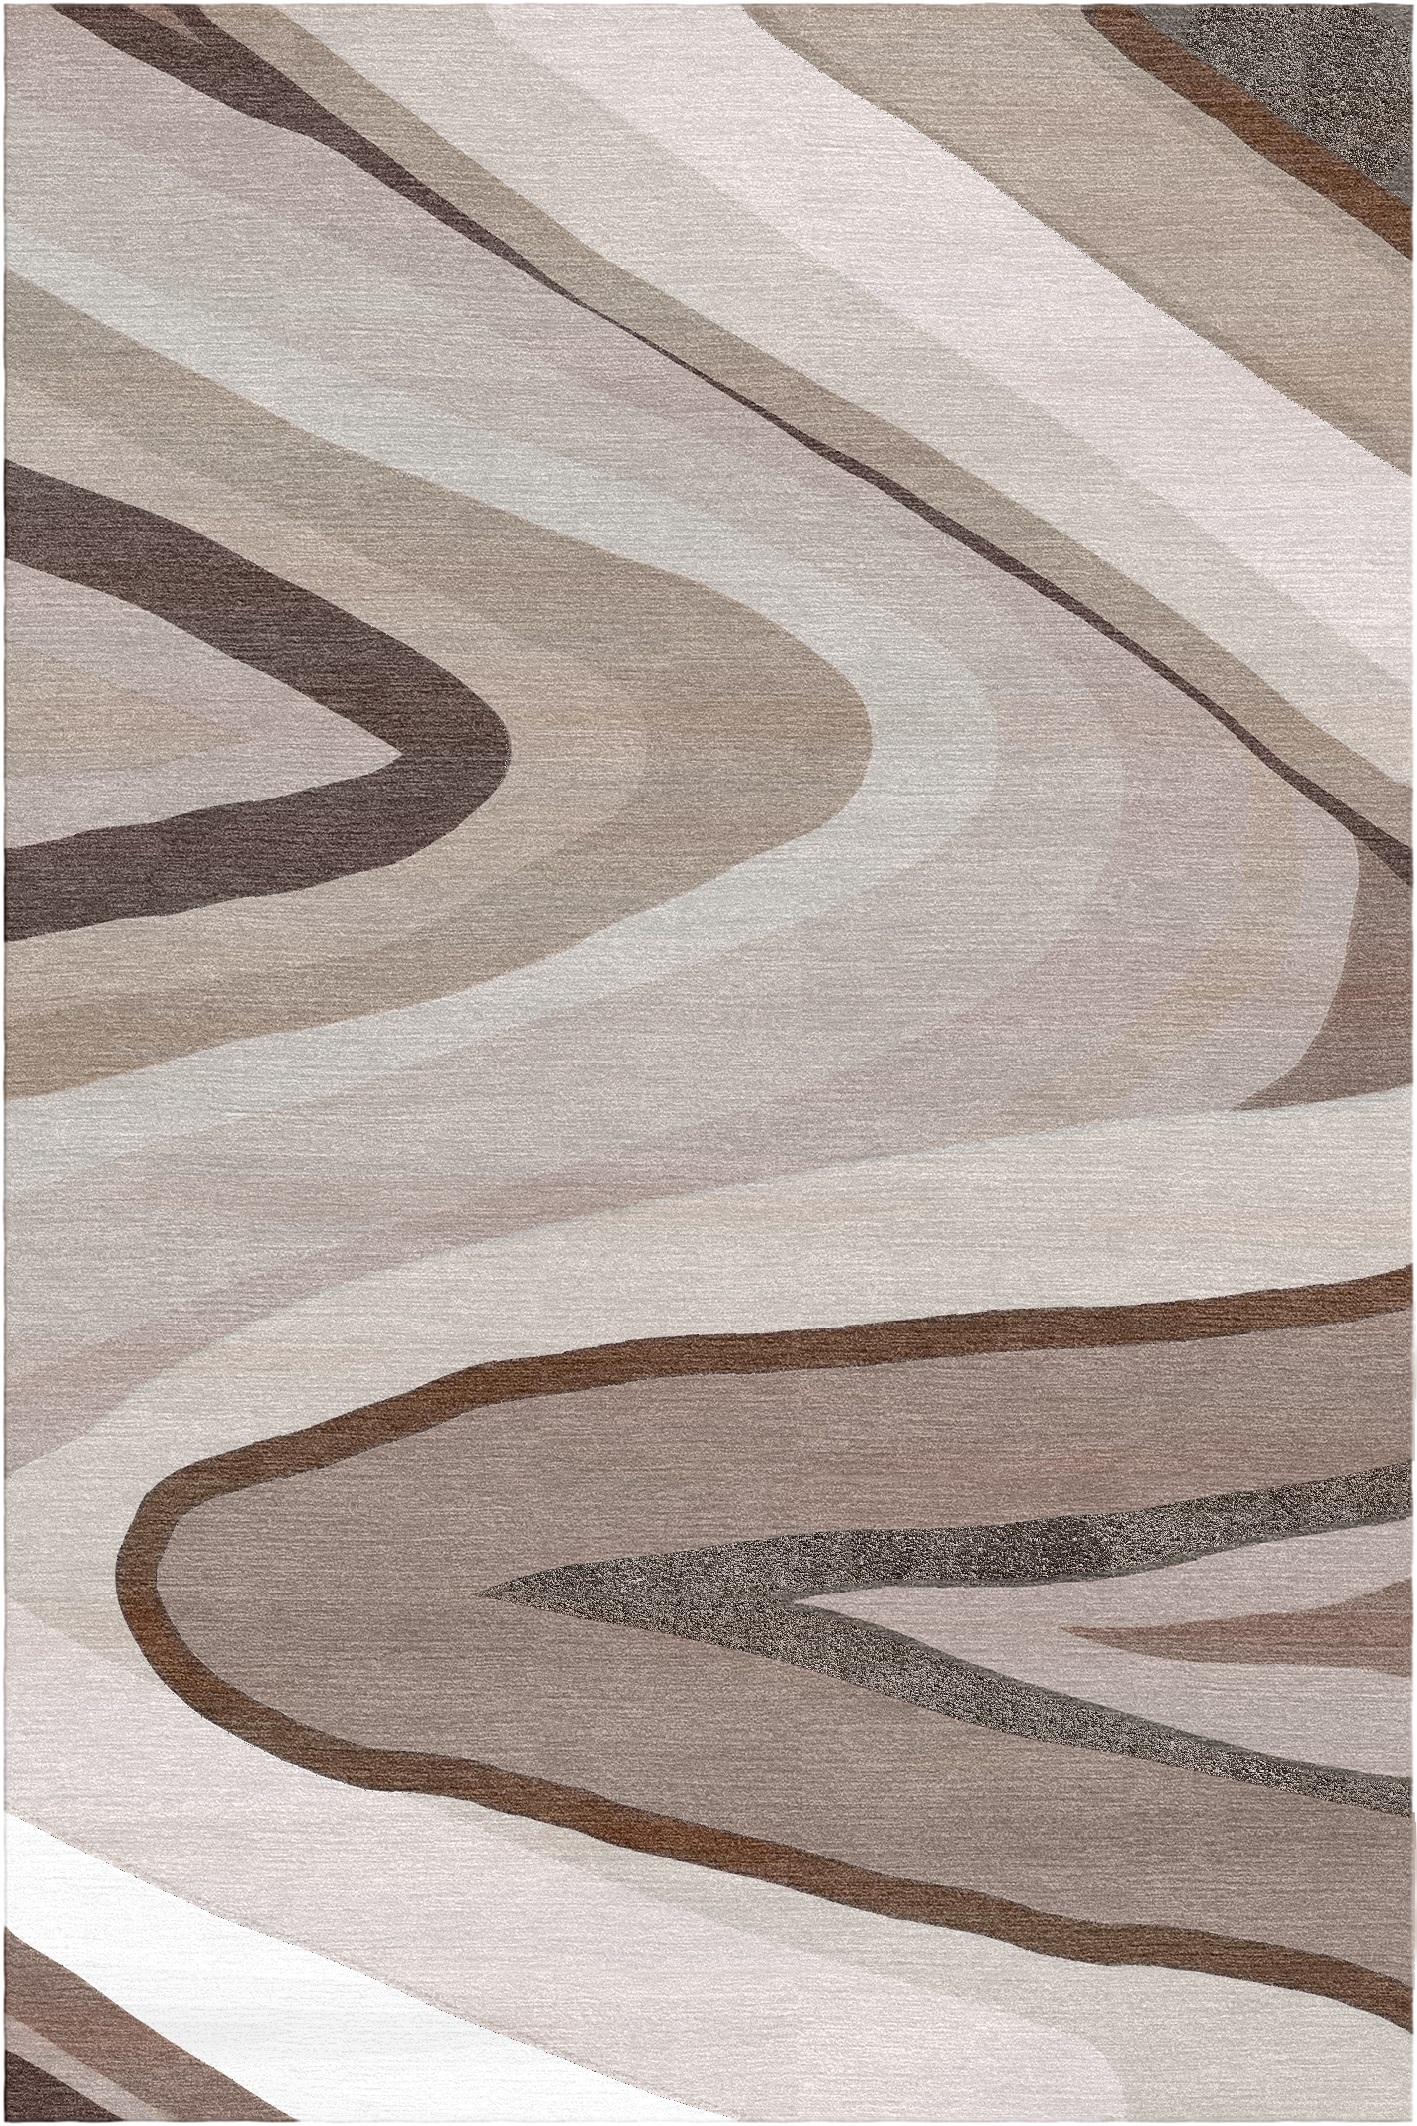 Pietra rug II by Giulio Brambilla
Dimensions: D 300 x W 200 x H 1.5 cm
Materials: NZ wool, bamboo silk
Available in other colors.

A captivating design by architect and designer Giulio Brambilla, this rug flaunts an abstract decoration